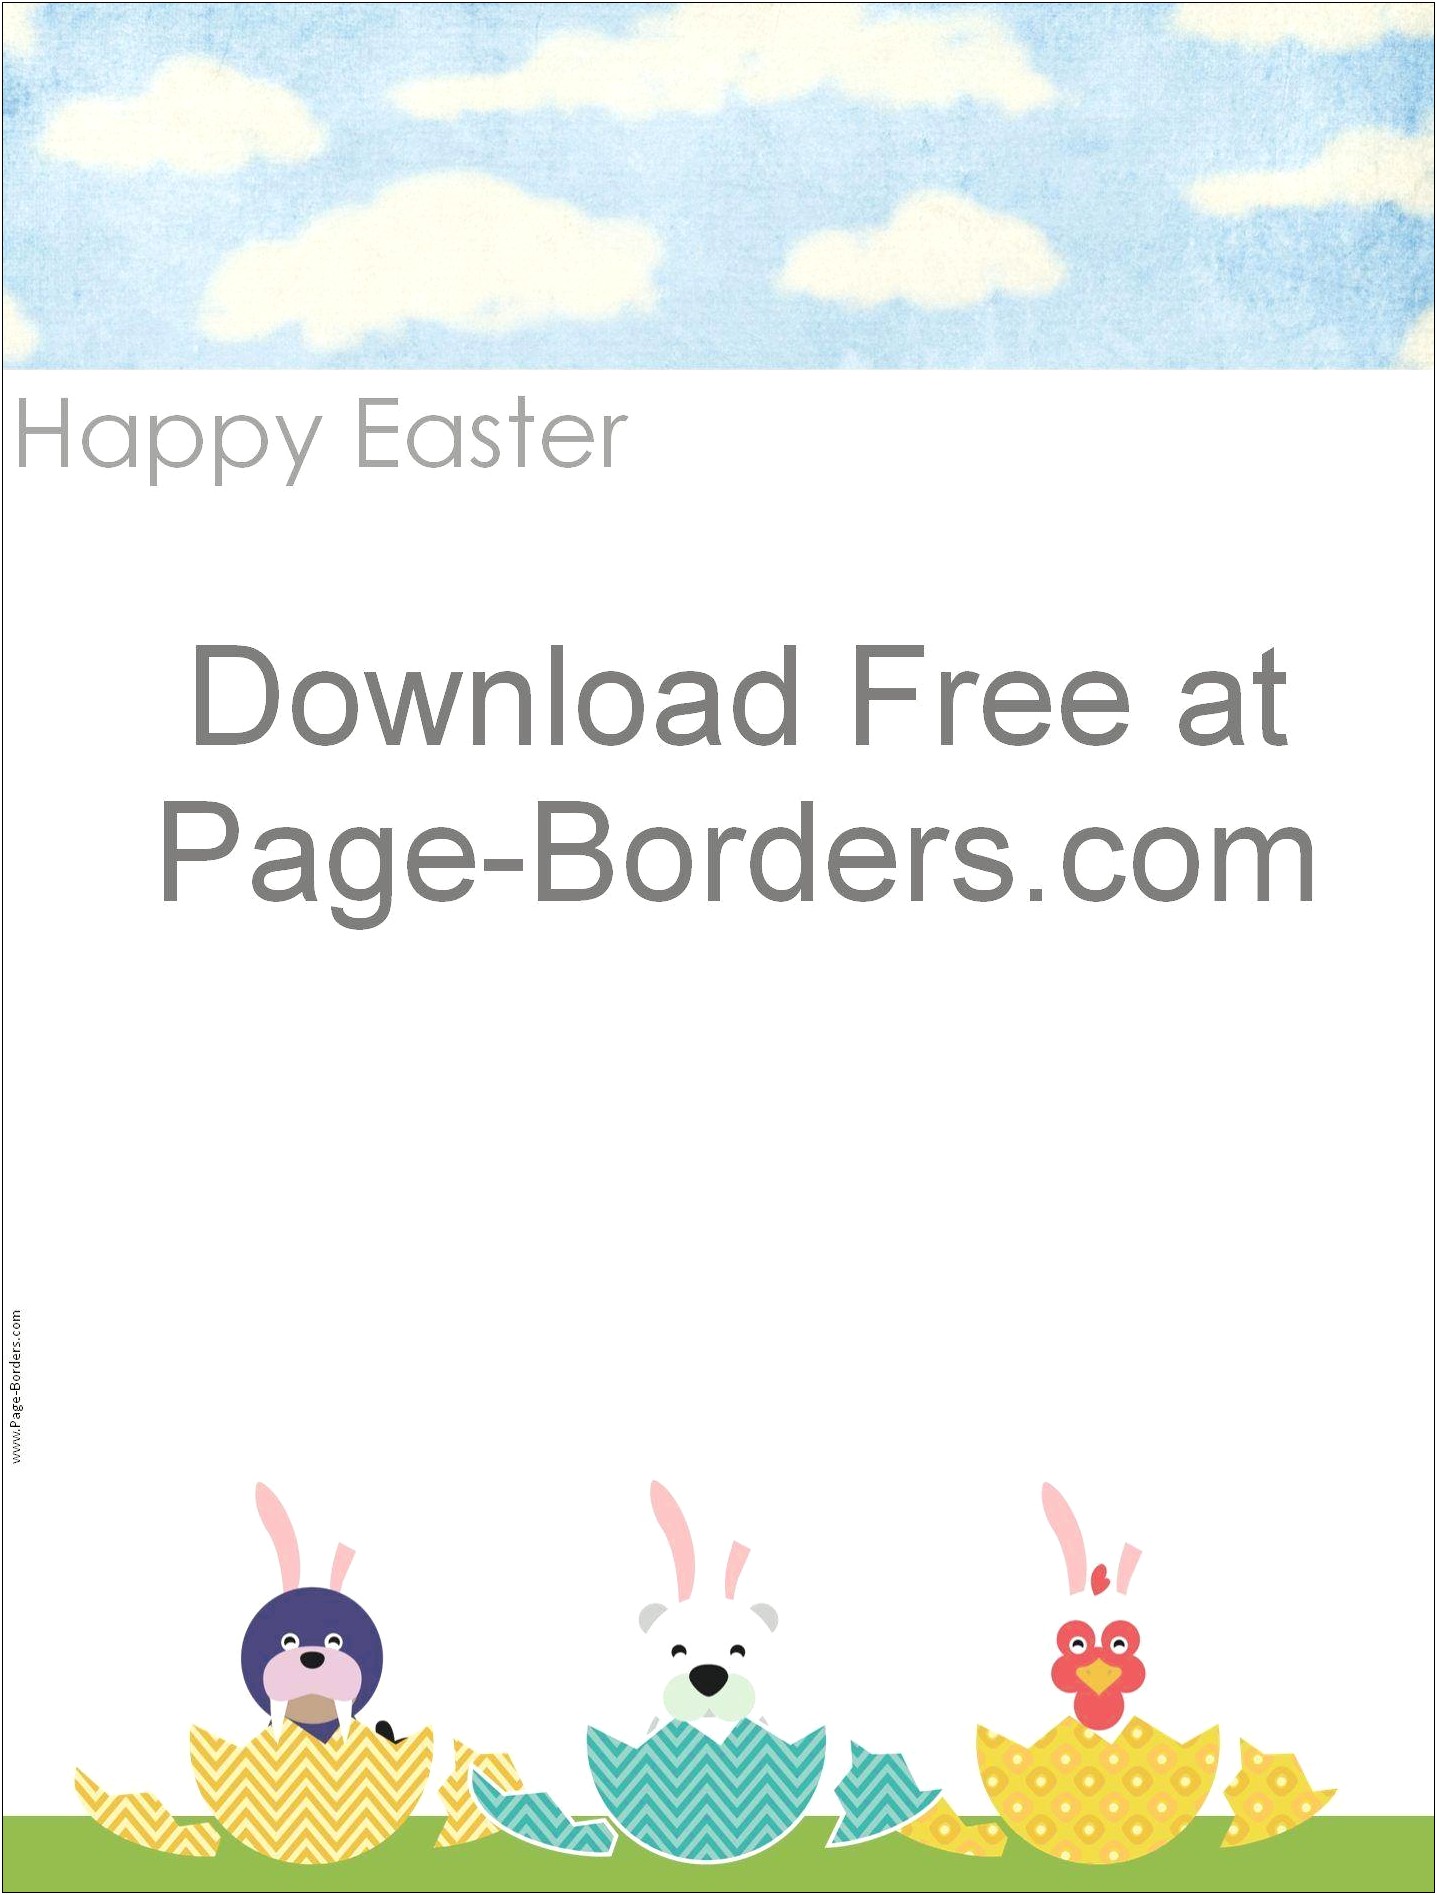 Free Printable Page Border Templates For Easter